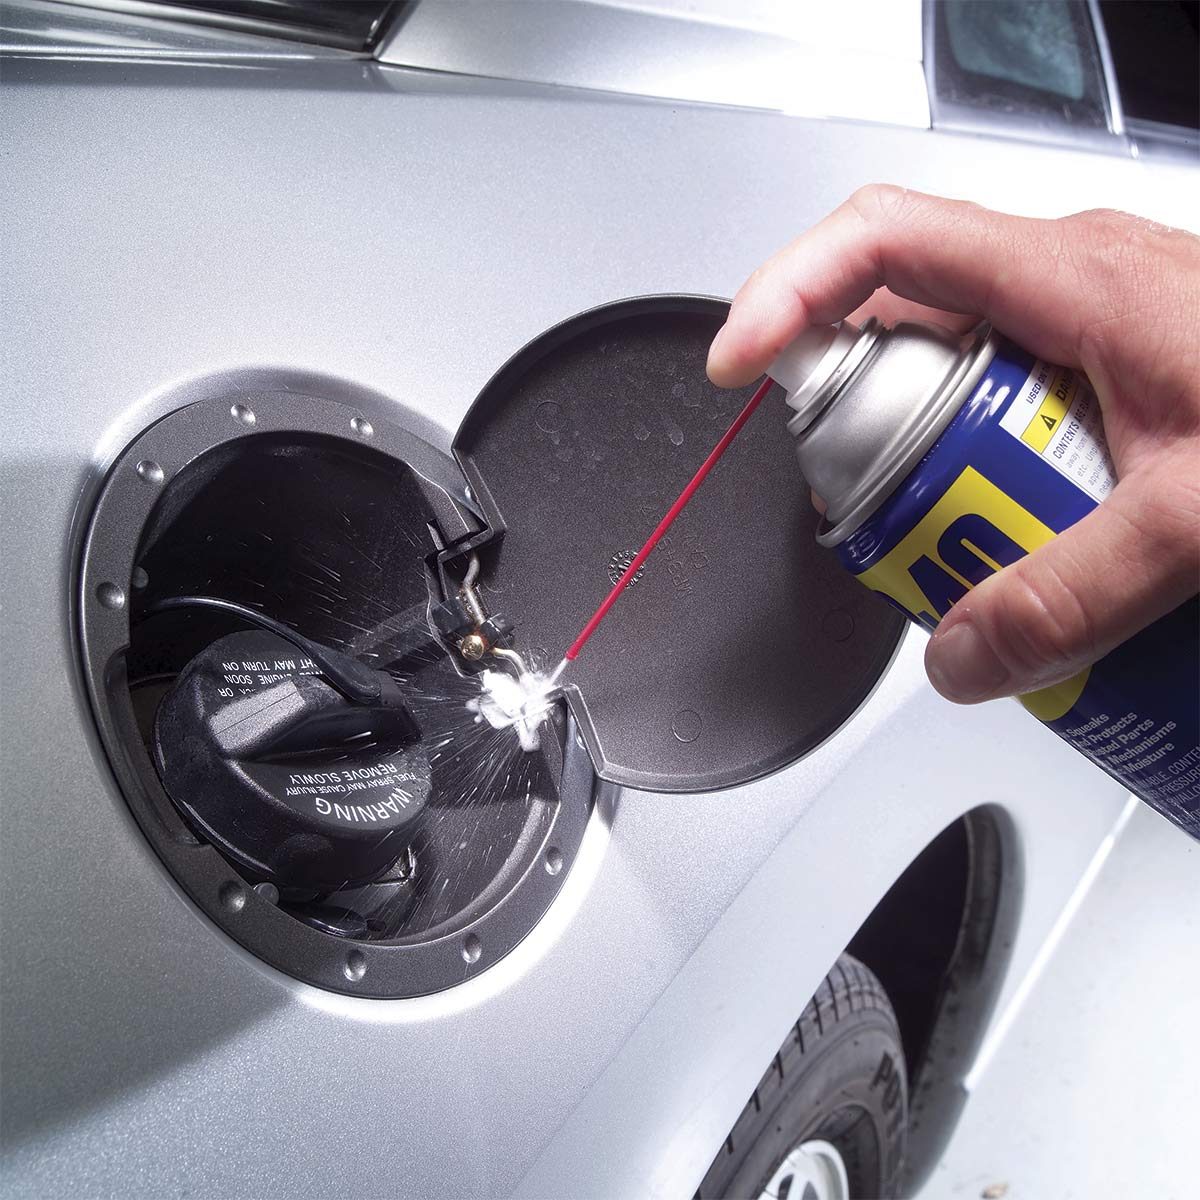 WD 40 Hacks - 13 clever WD 40 uses (not just for degreasing!) 